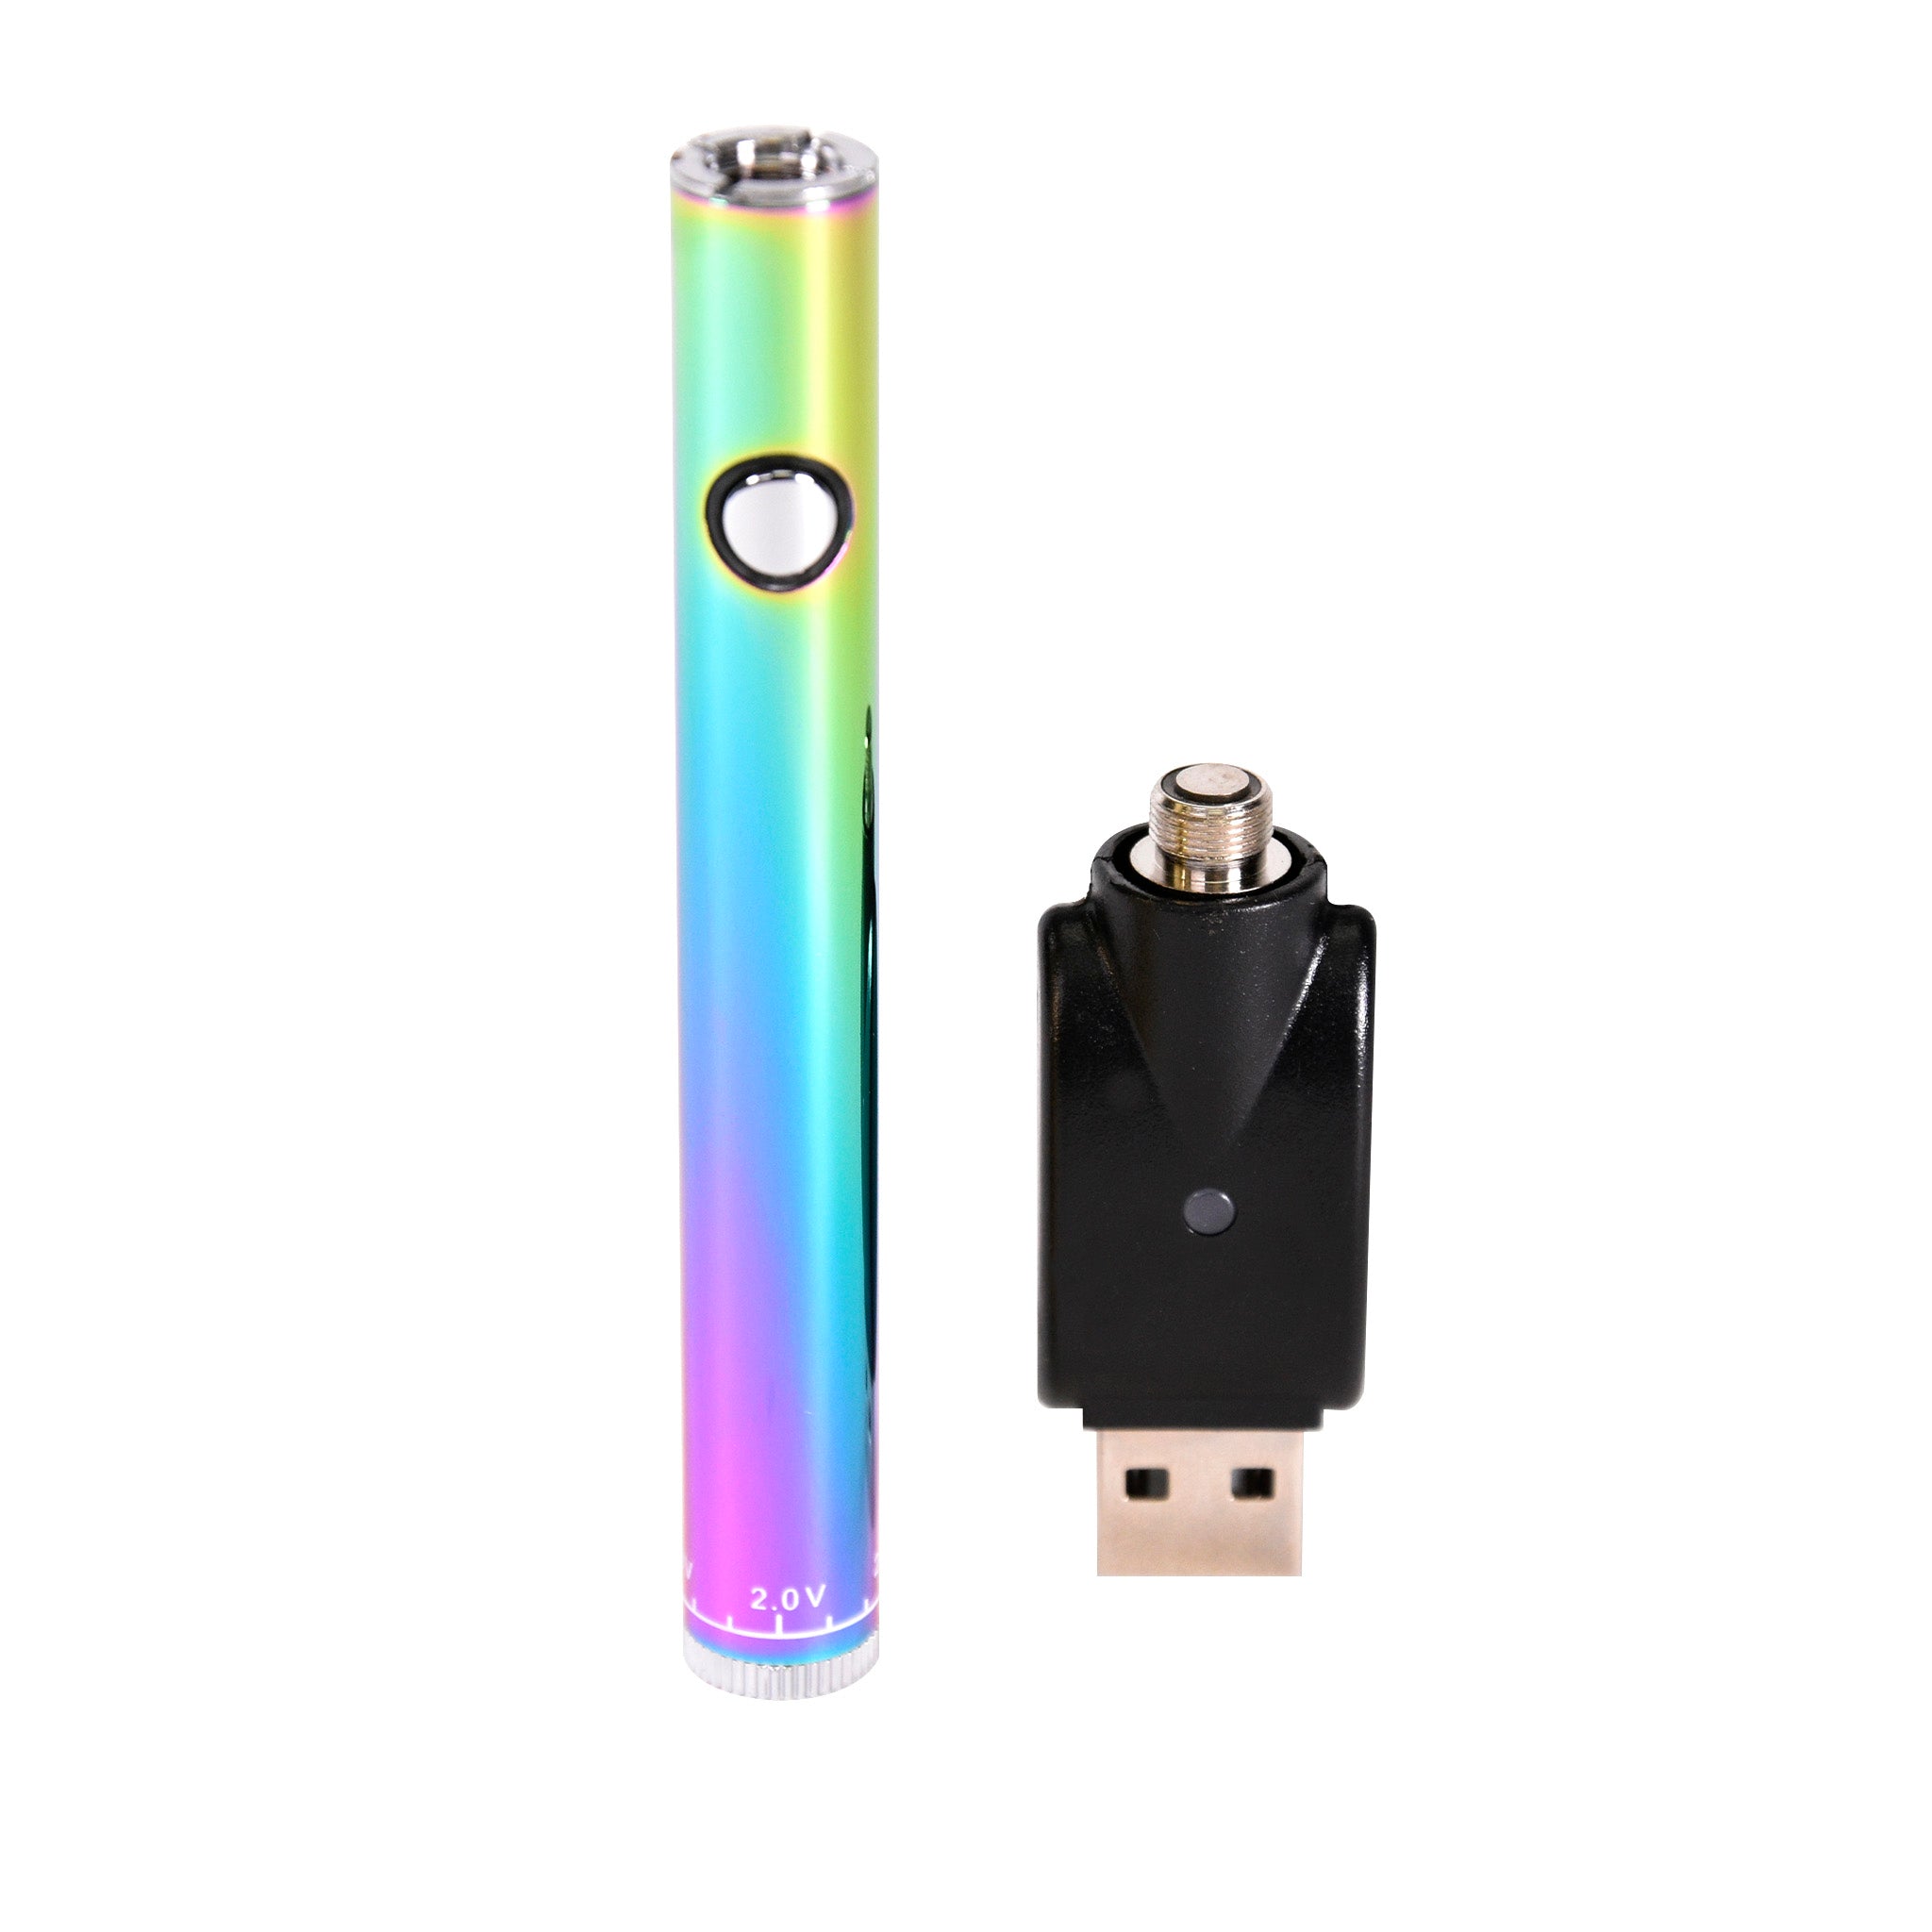 Twist Battery Pro Silver Adjustable Voltage 510 Cartridge Battery by Vape  Gear : CBDGuys : fast shipping, buy online with credit card